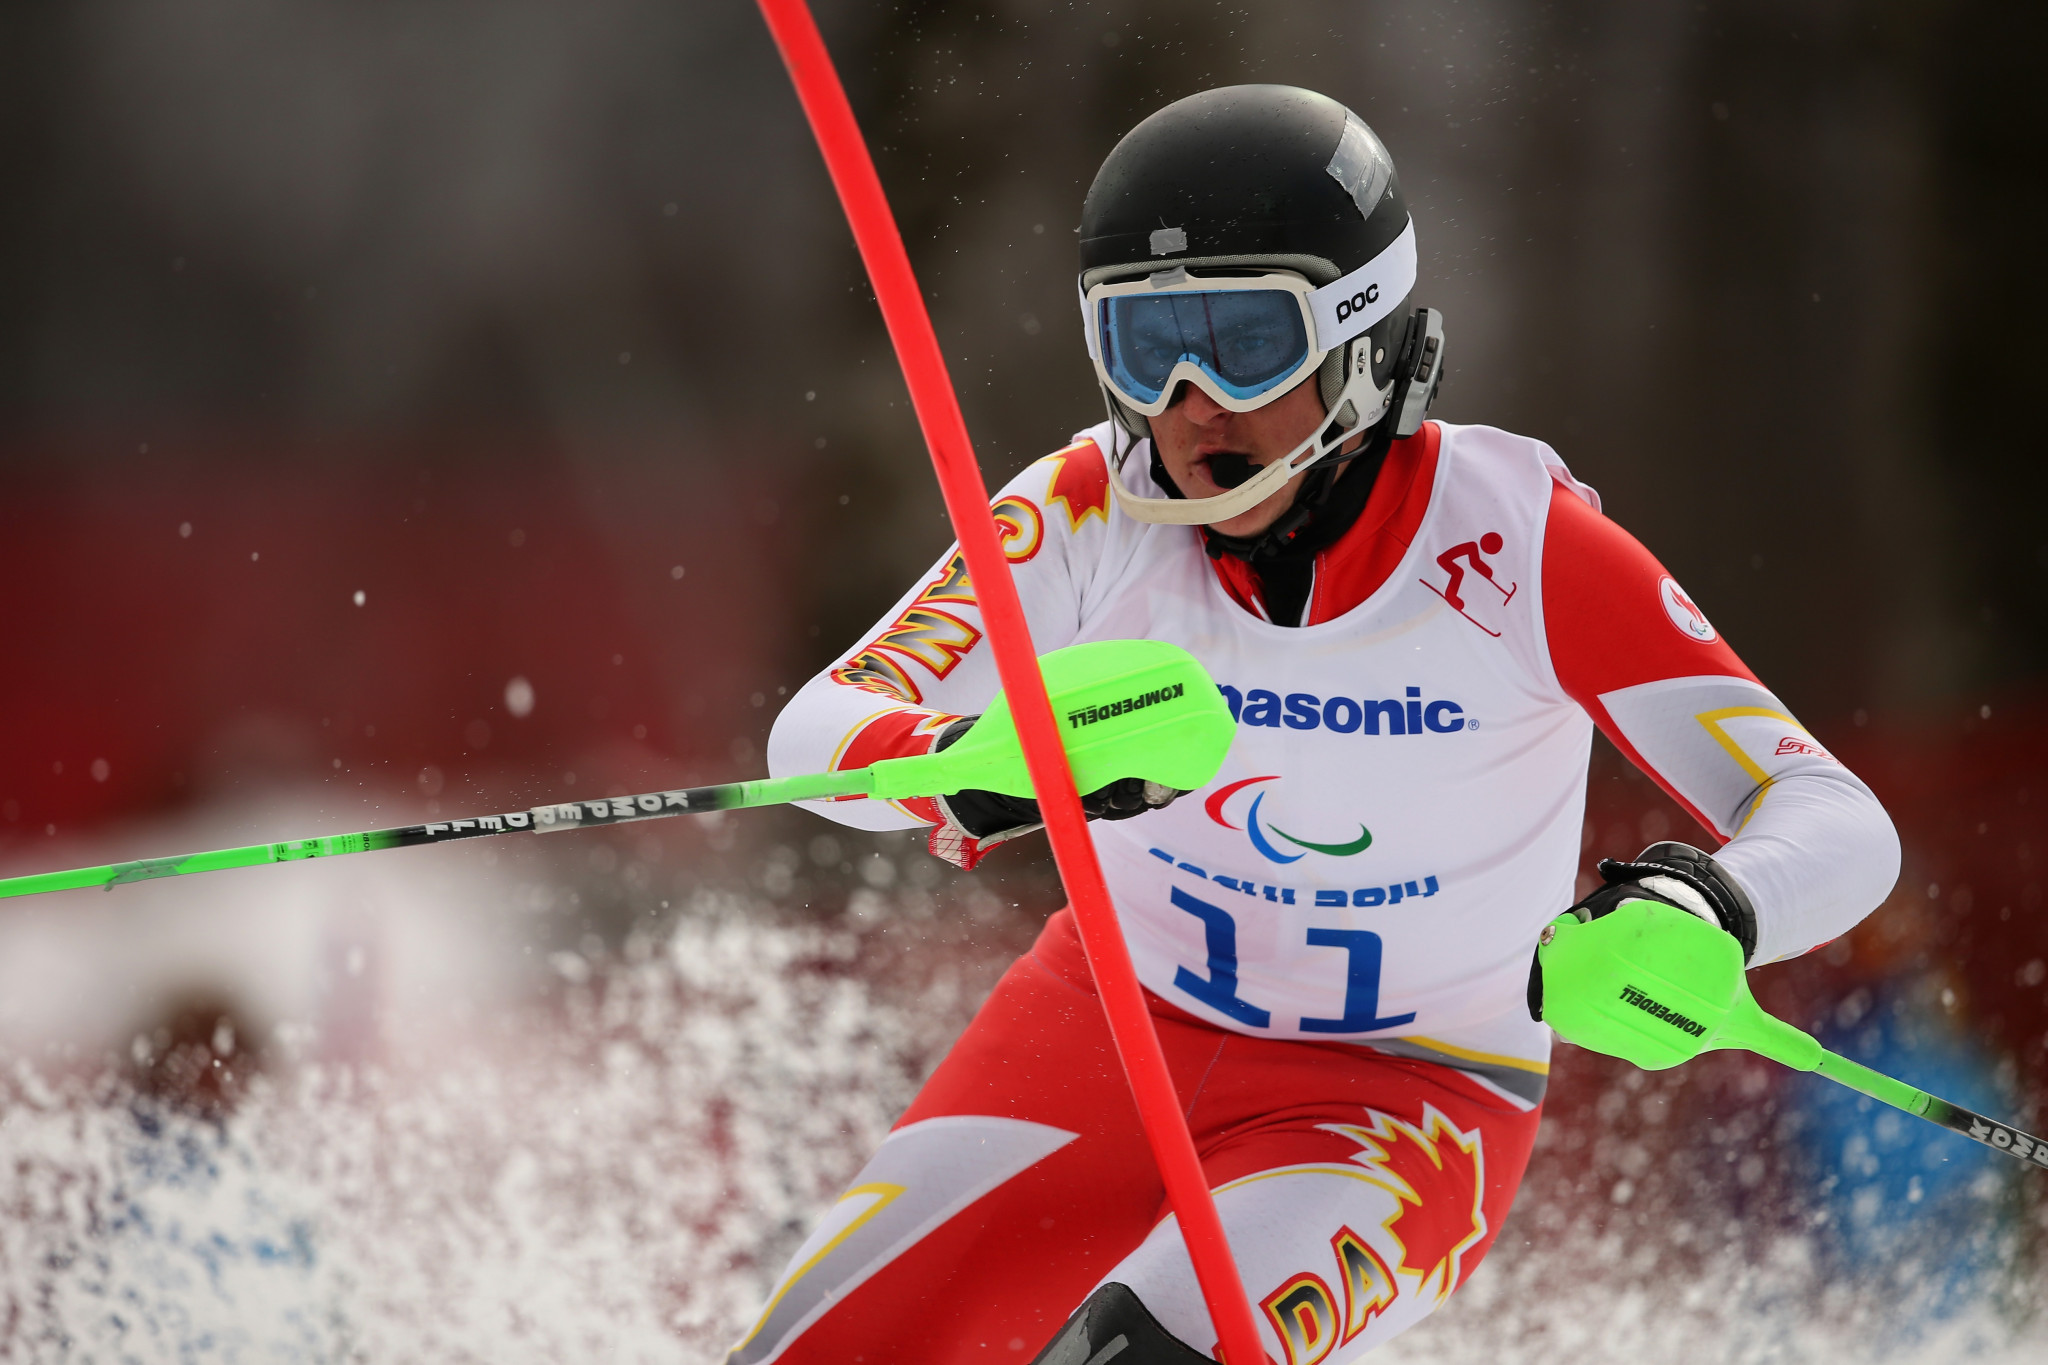 Marcoux wins IPC's Allianz Athlete of the Month award for February